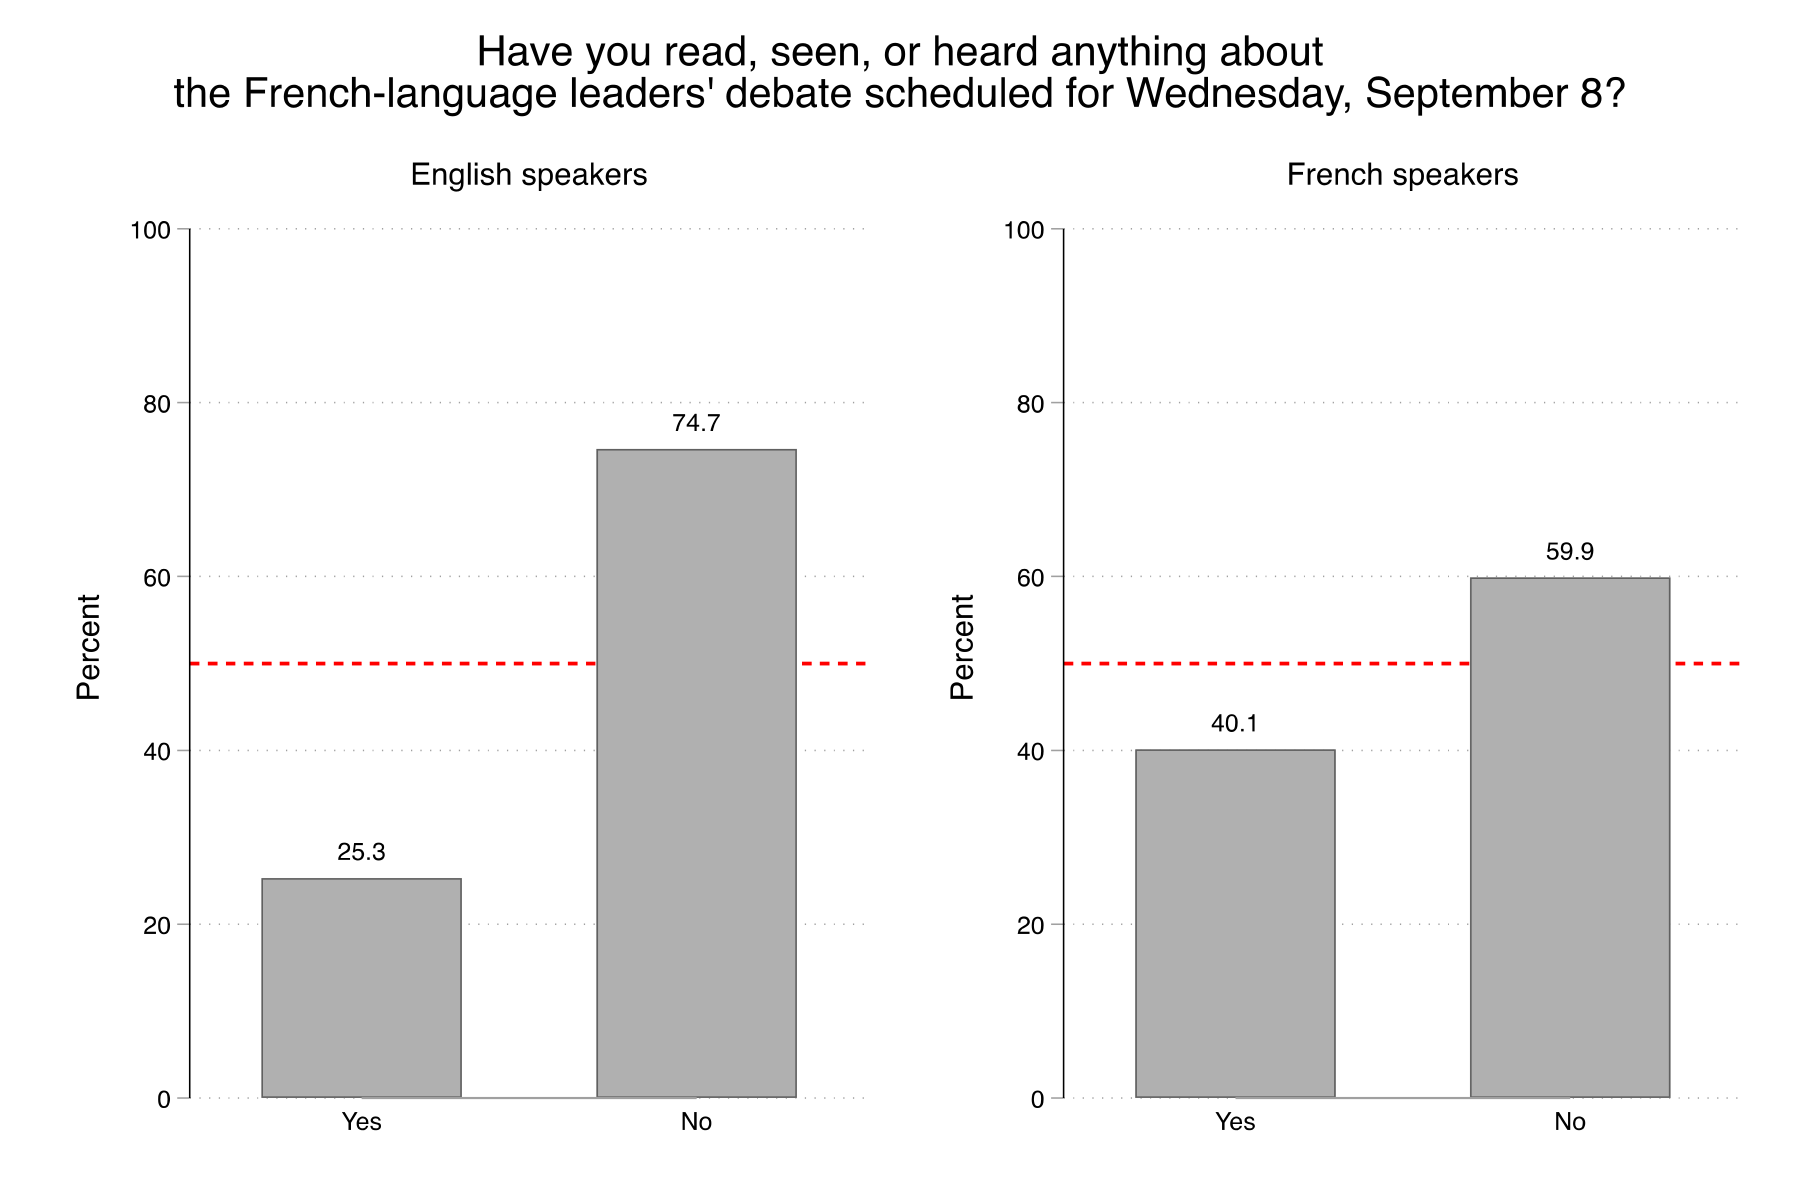 Figure 1. This figure shows awareness in the lead up to the French debate: 40% of French speakers, and 25% of English speakers, were aware of the French debate.